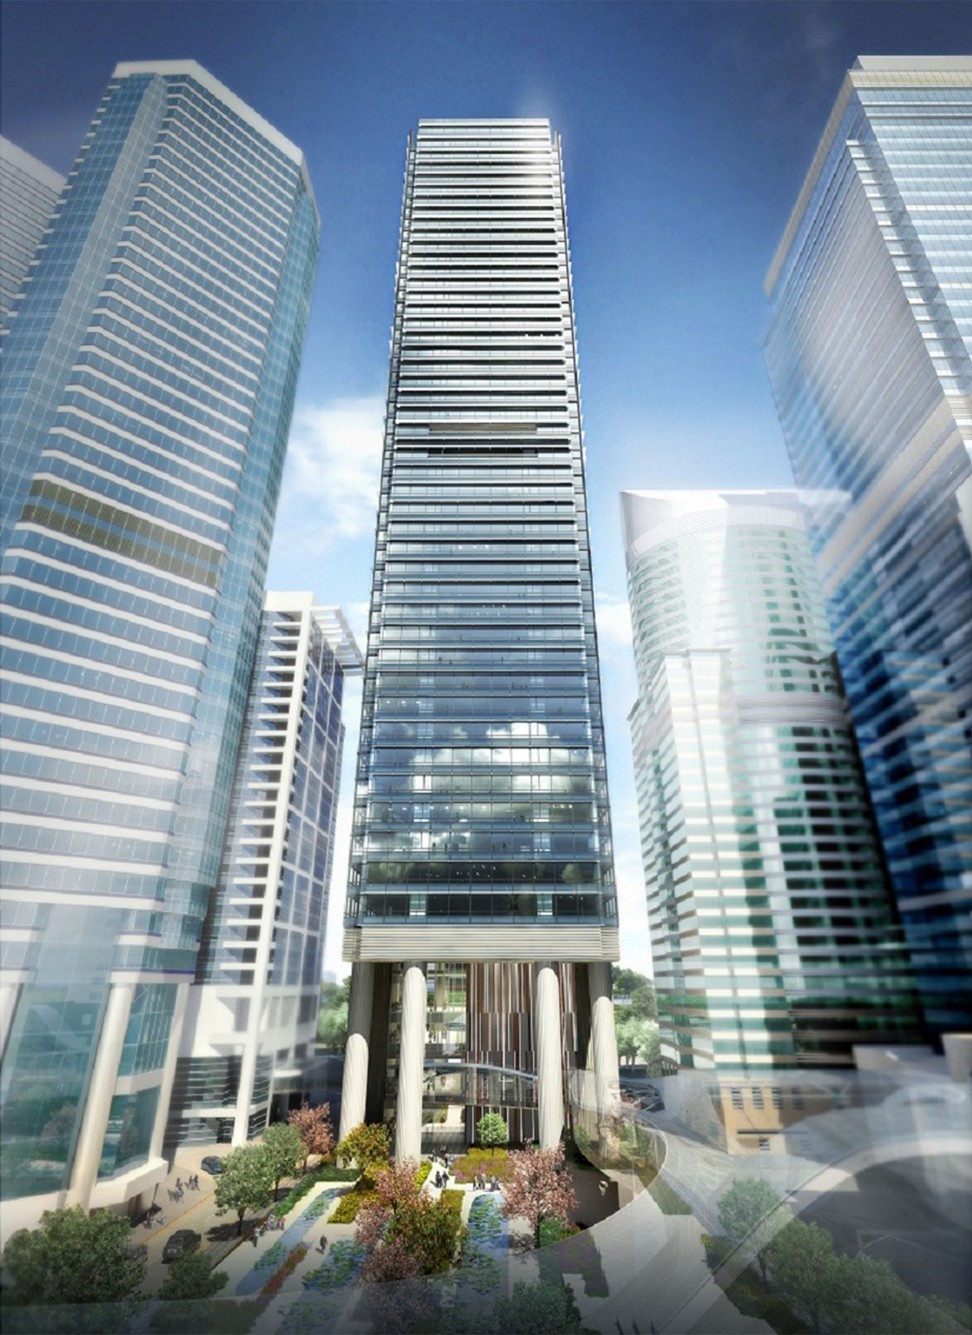 An artist’s impression of the Taikoo Place redevelopment in Quarry Bay. Photo: SCMP